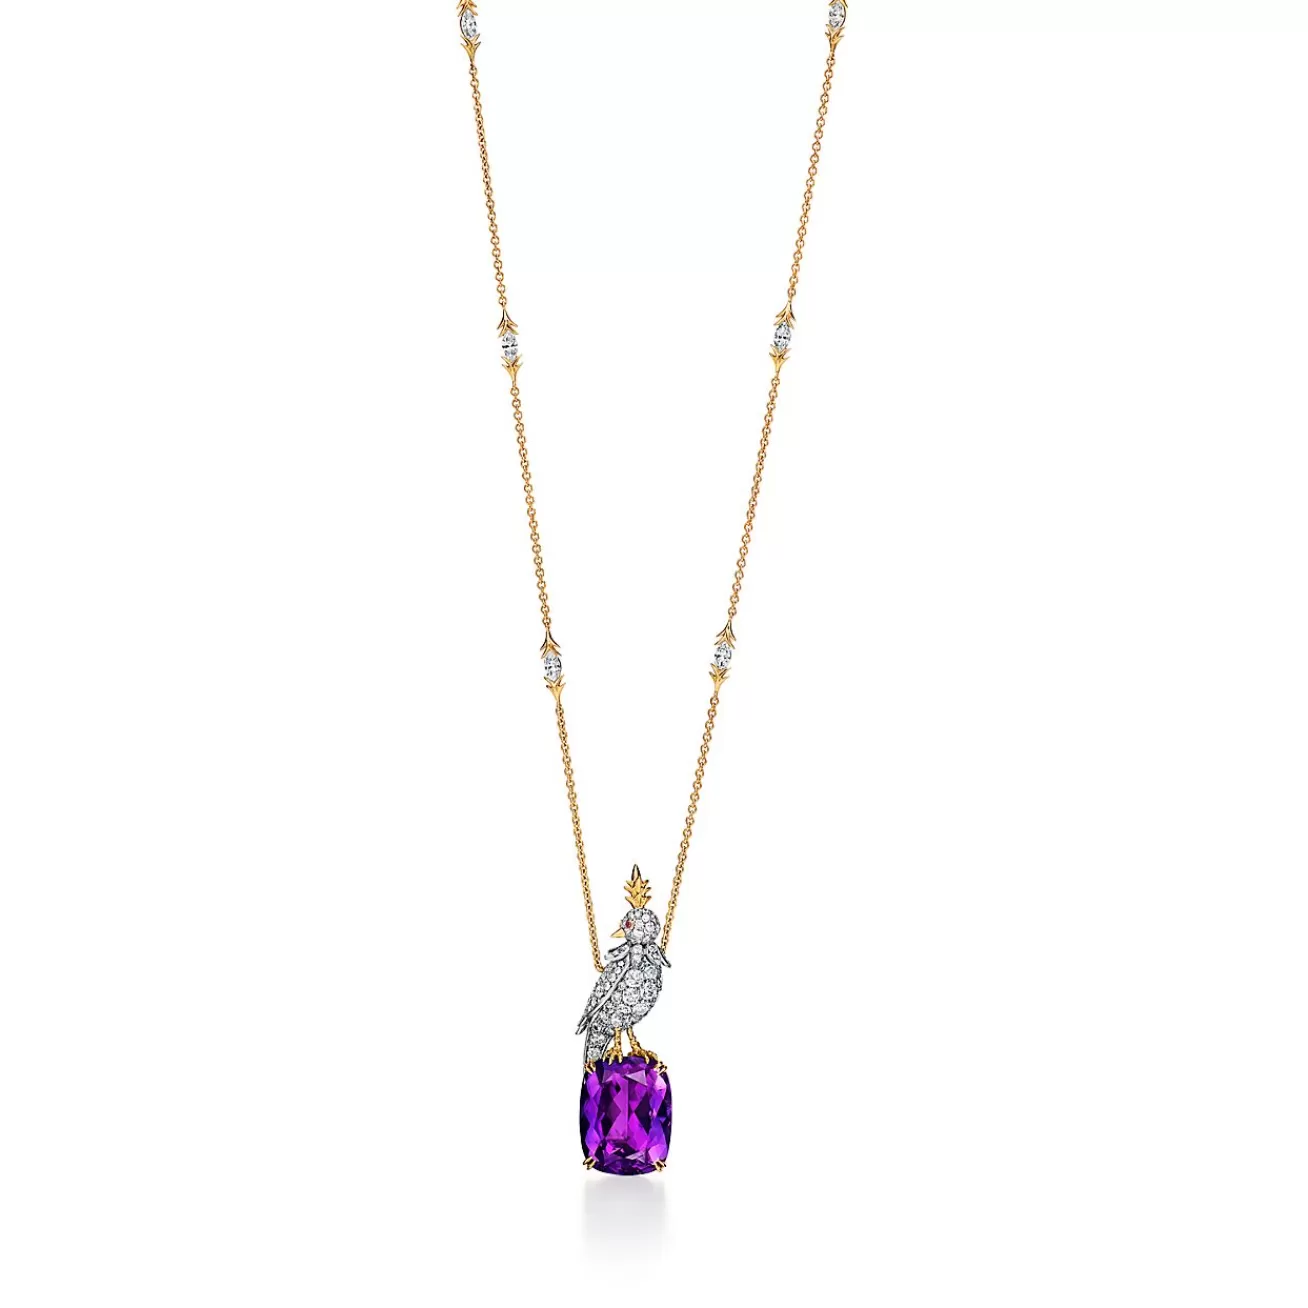 Tiffany & Co. Pendant in Gold and Platinum with an Amethyst, Diamonds and Pink Sapphires | ^ Necklaces & Pendants | Gold Jewelry